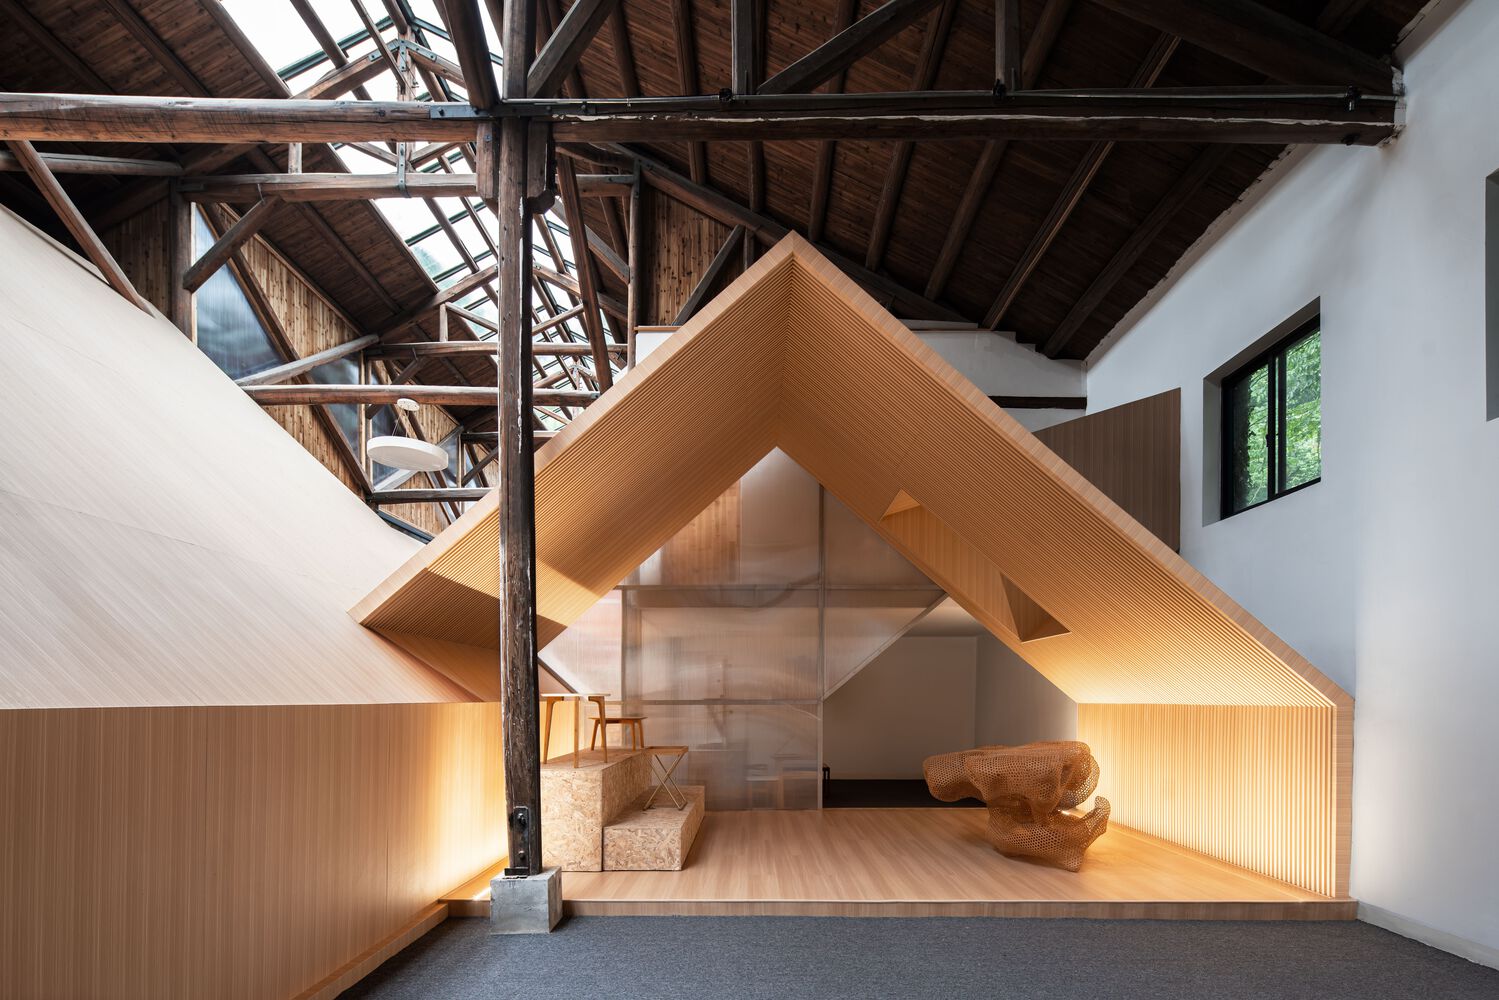 Transforming an Abandoned Military Warehouse into An Exhibition Center